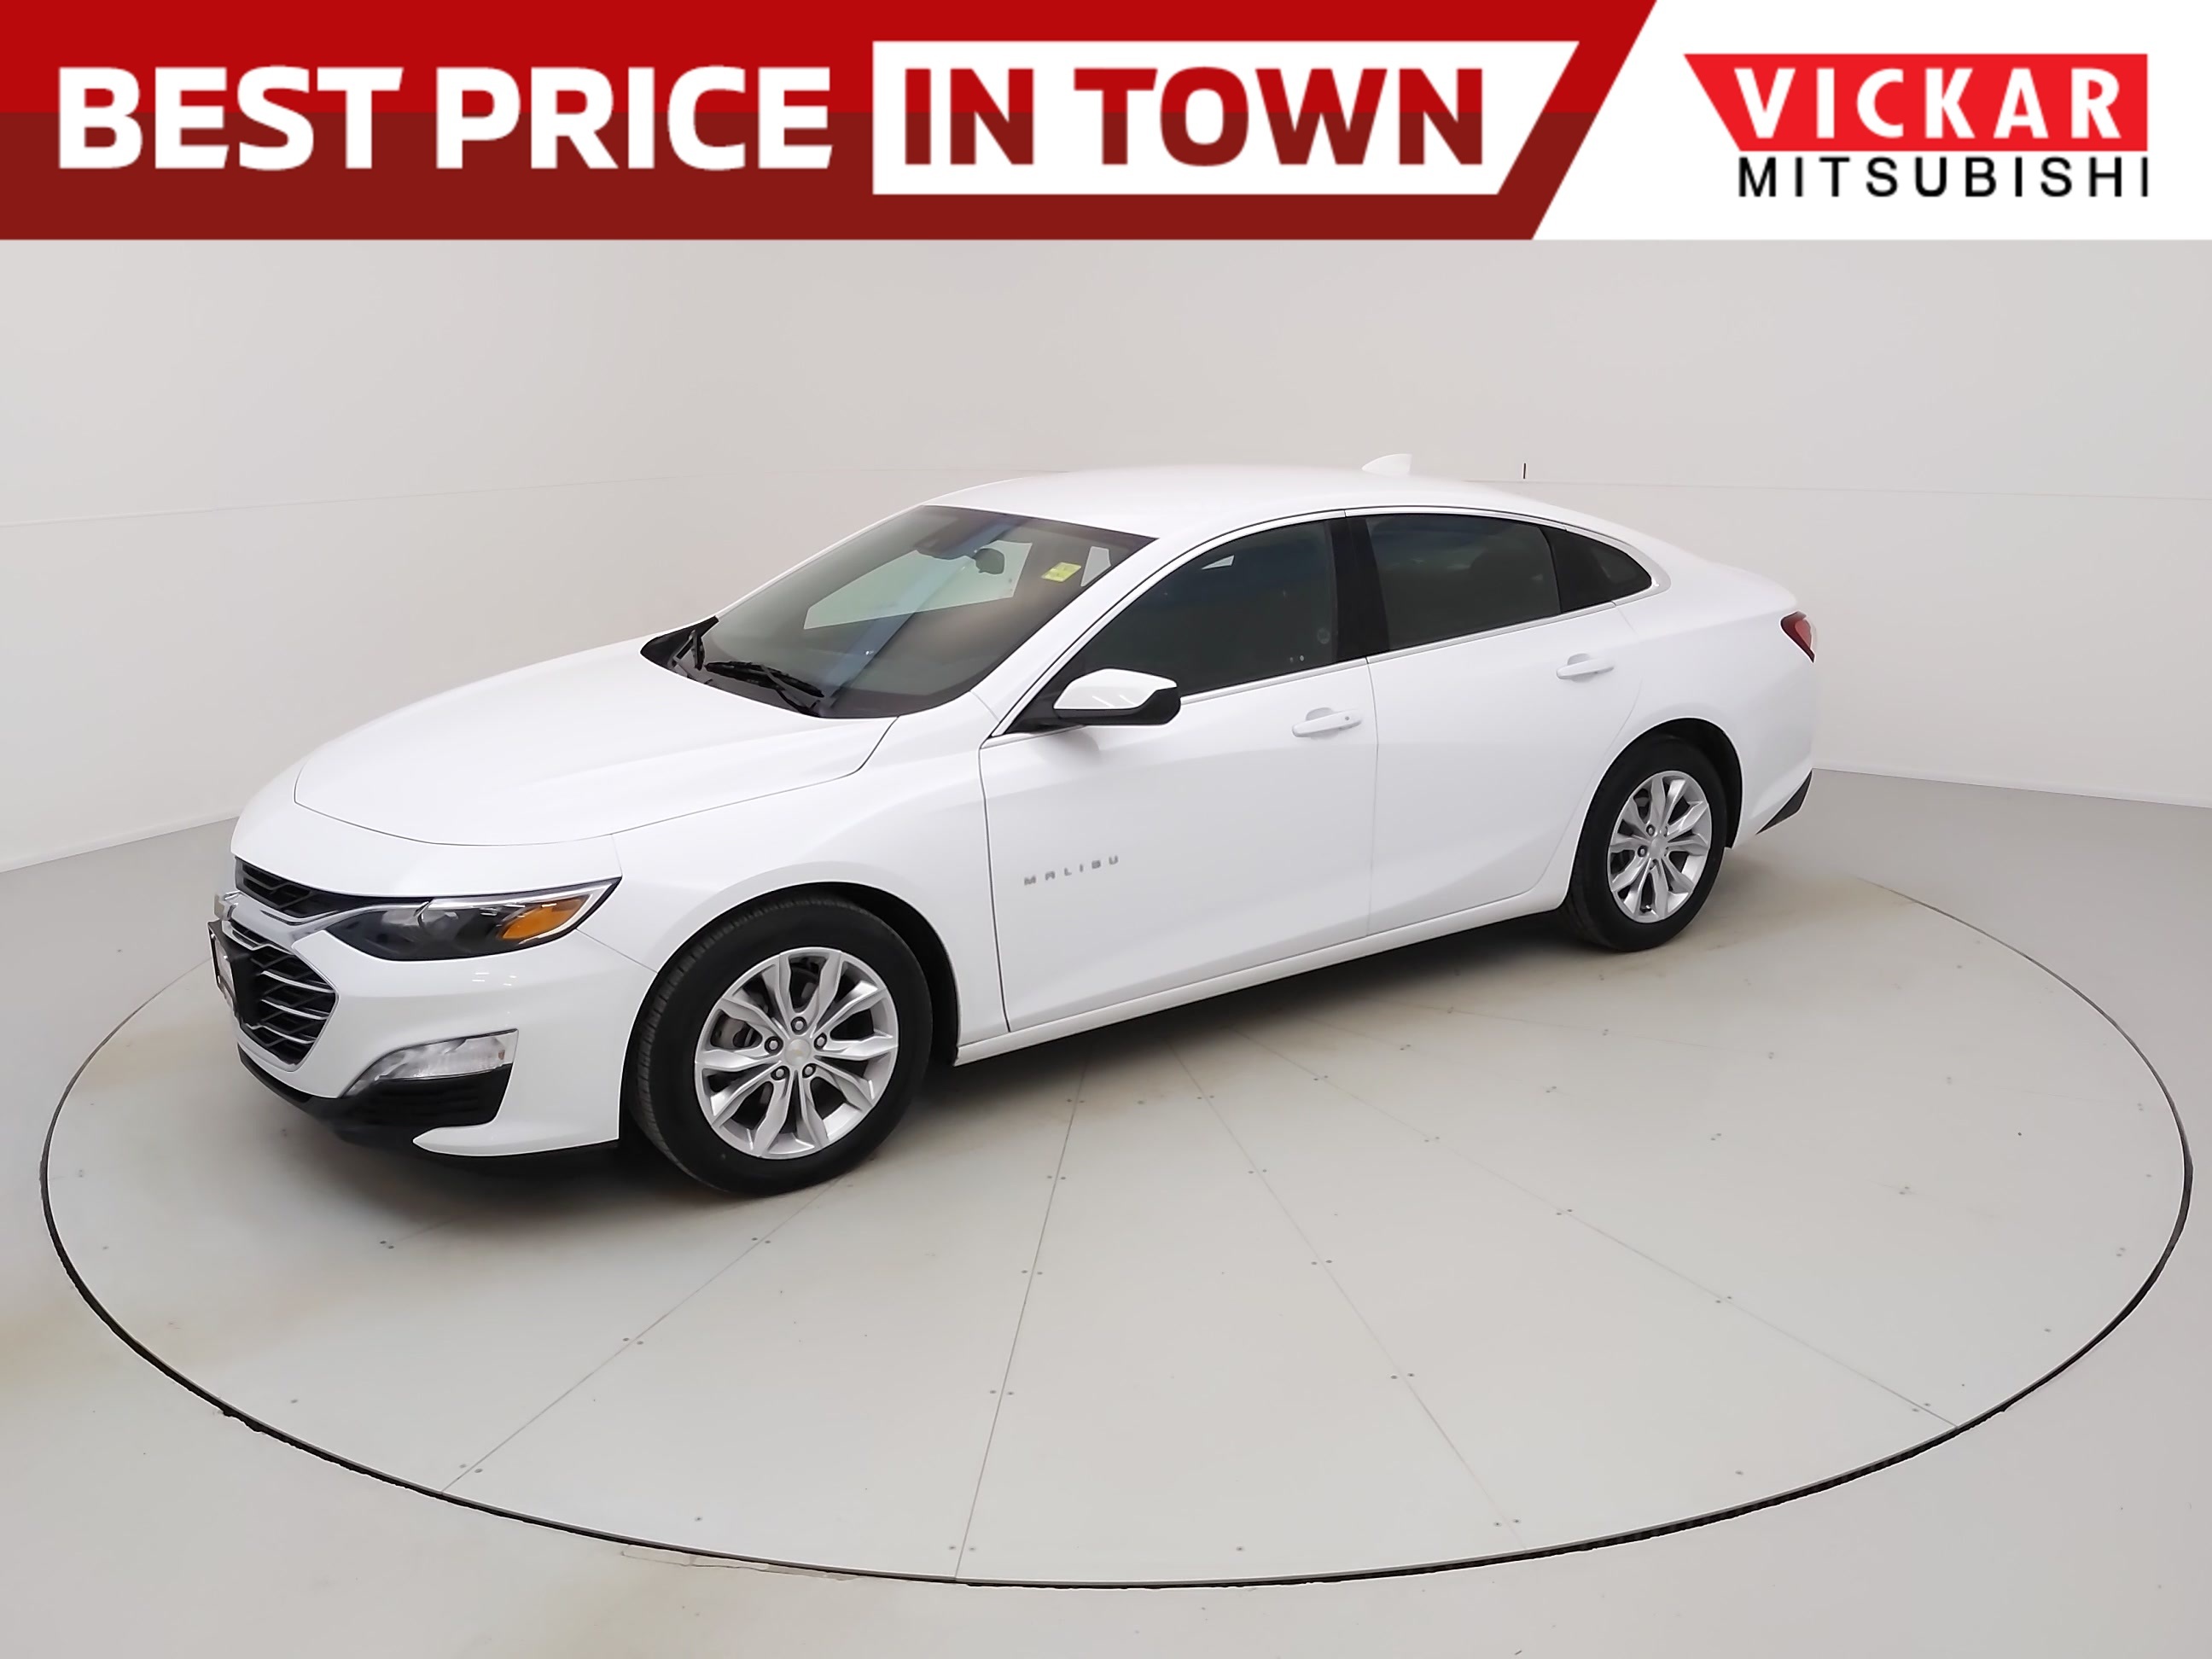 2020 Chevrolet Malibu LT - LOCAL TRADE IN, HEATED SEATS, BACK UP CAM